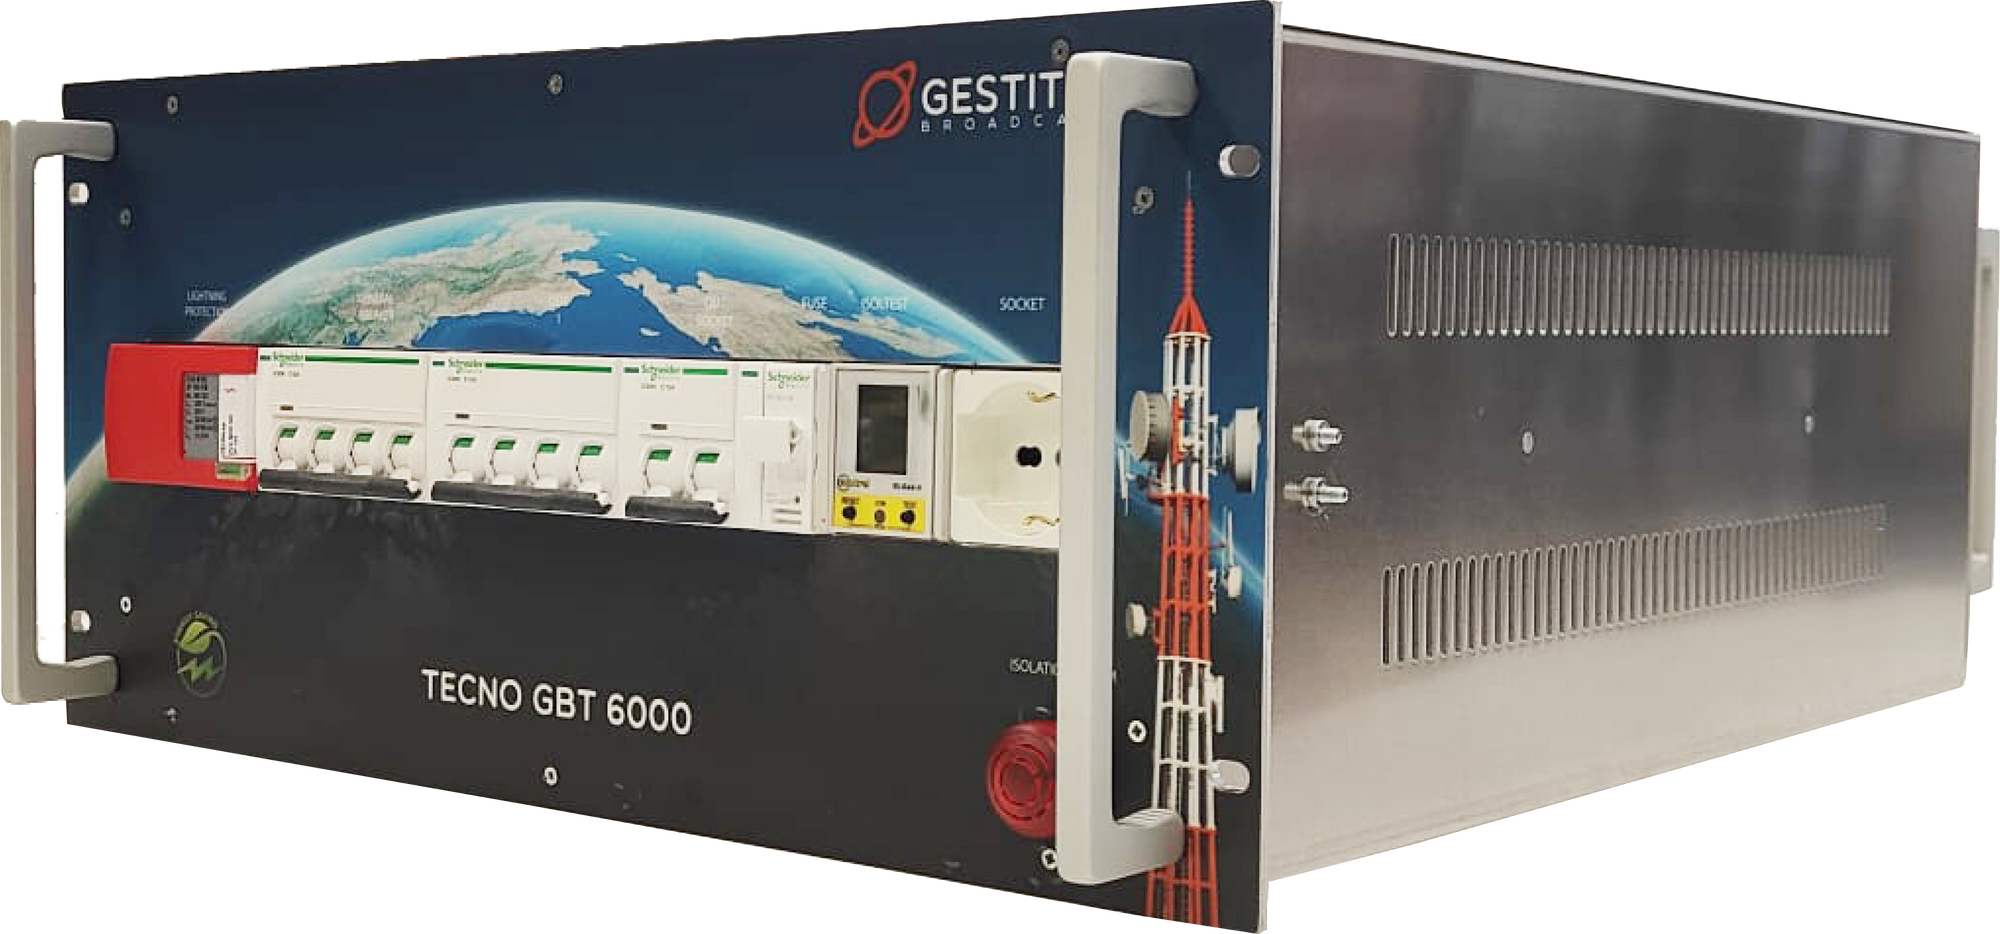 Electrical protection systems for TV and Radio Broadcast Equipment Triphase / Tecno GBT Gestitel - 305broadcast